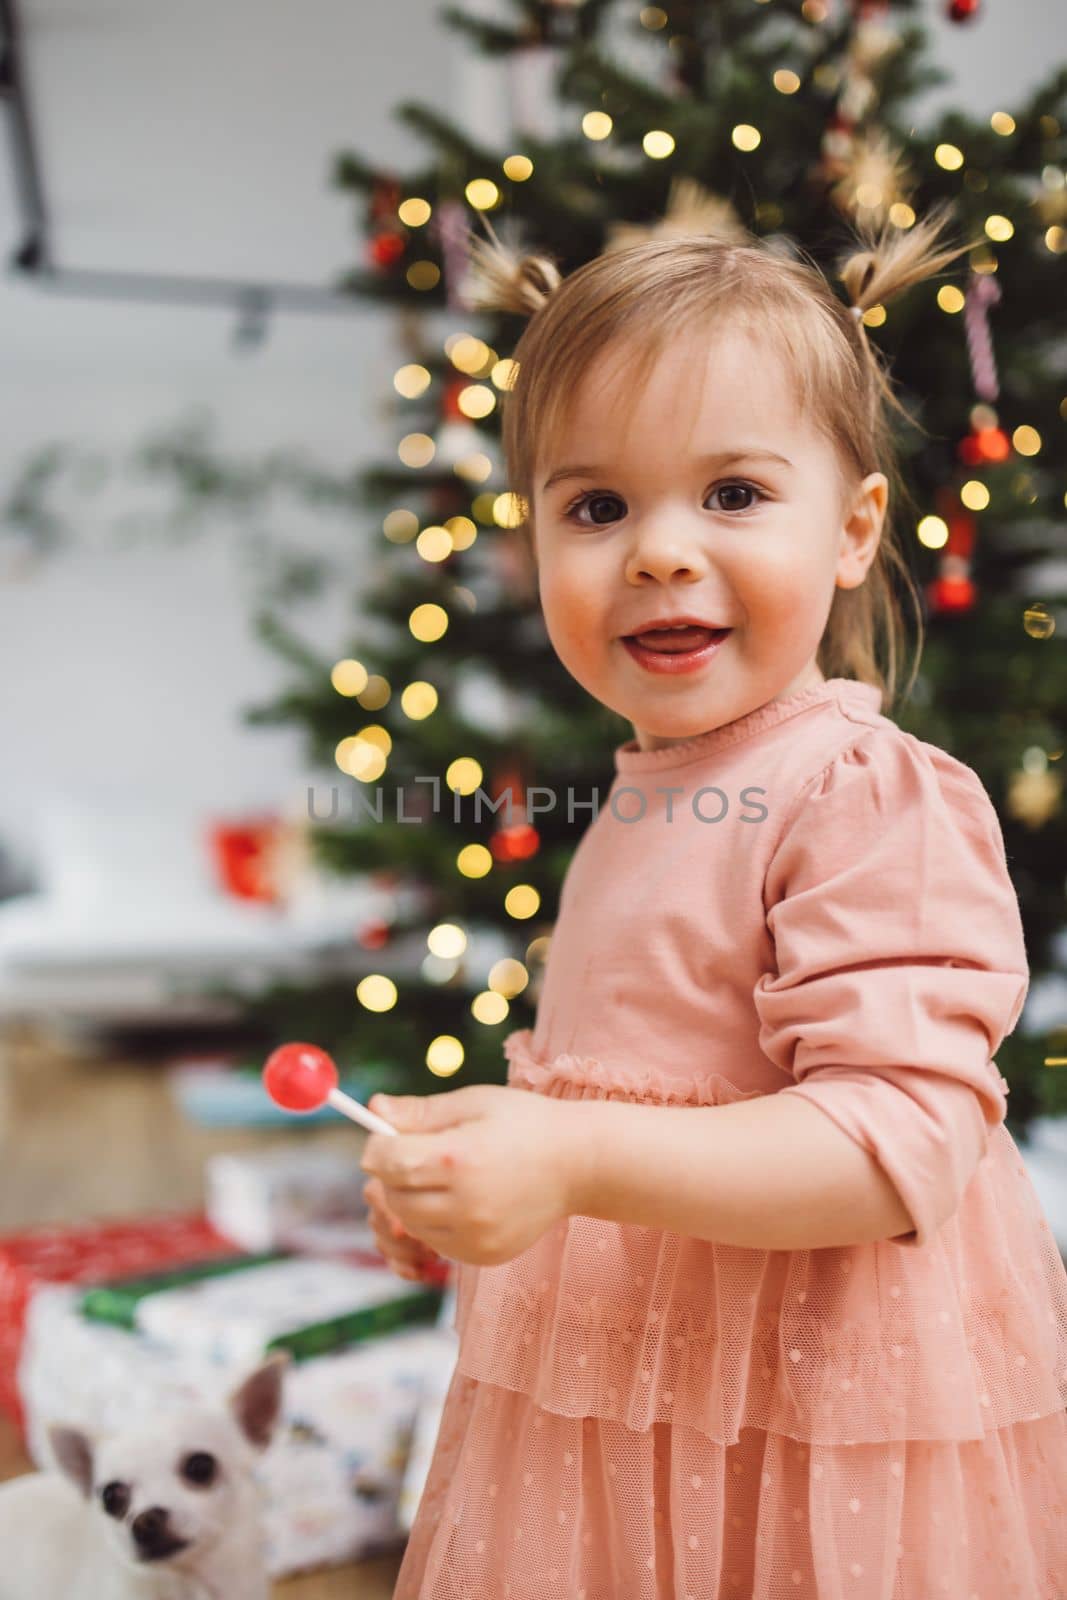 Vertical portrait of cute baby girl with two ponytails standing in front of the Christmas tree by VisualProductions